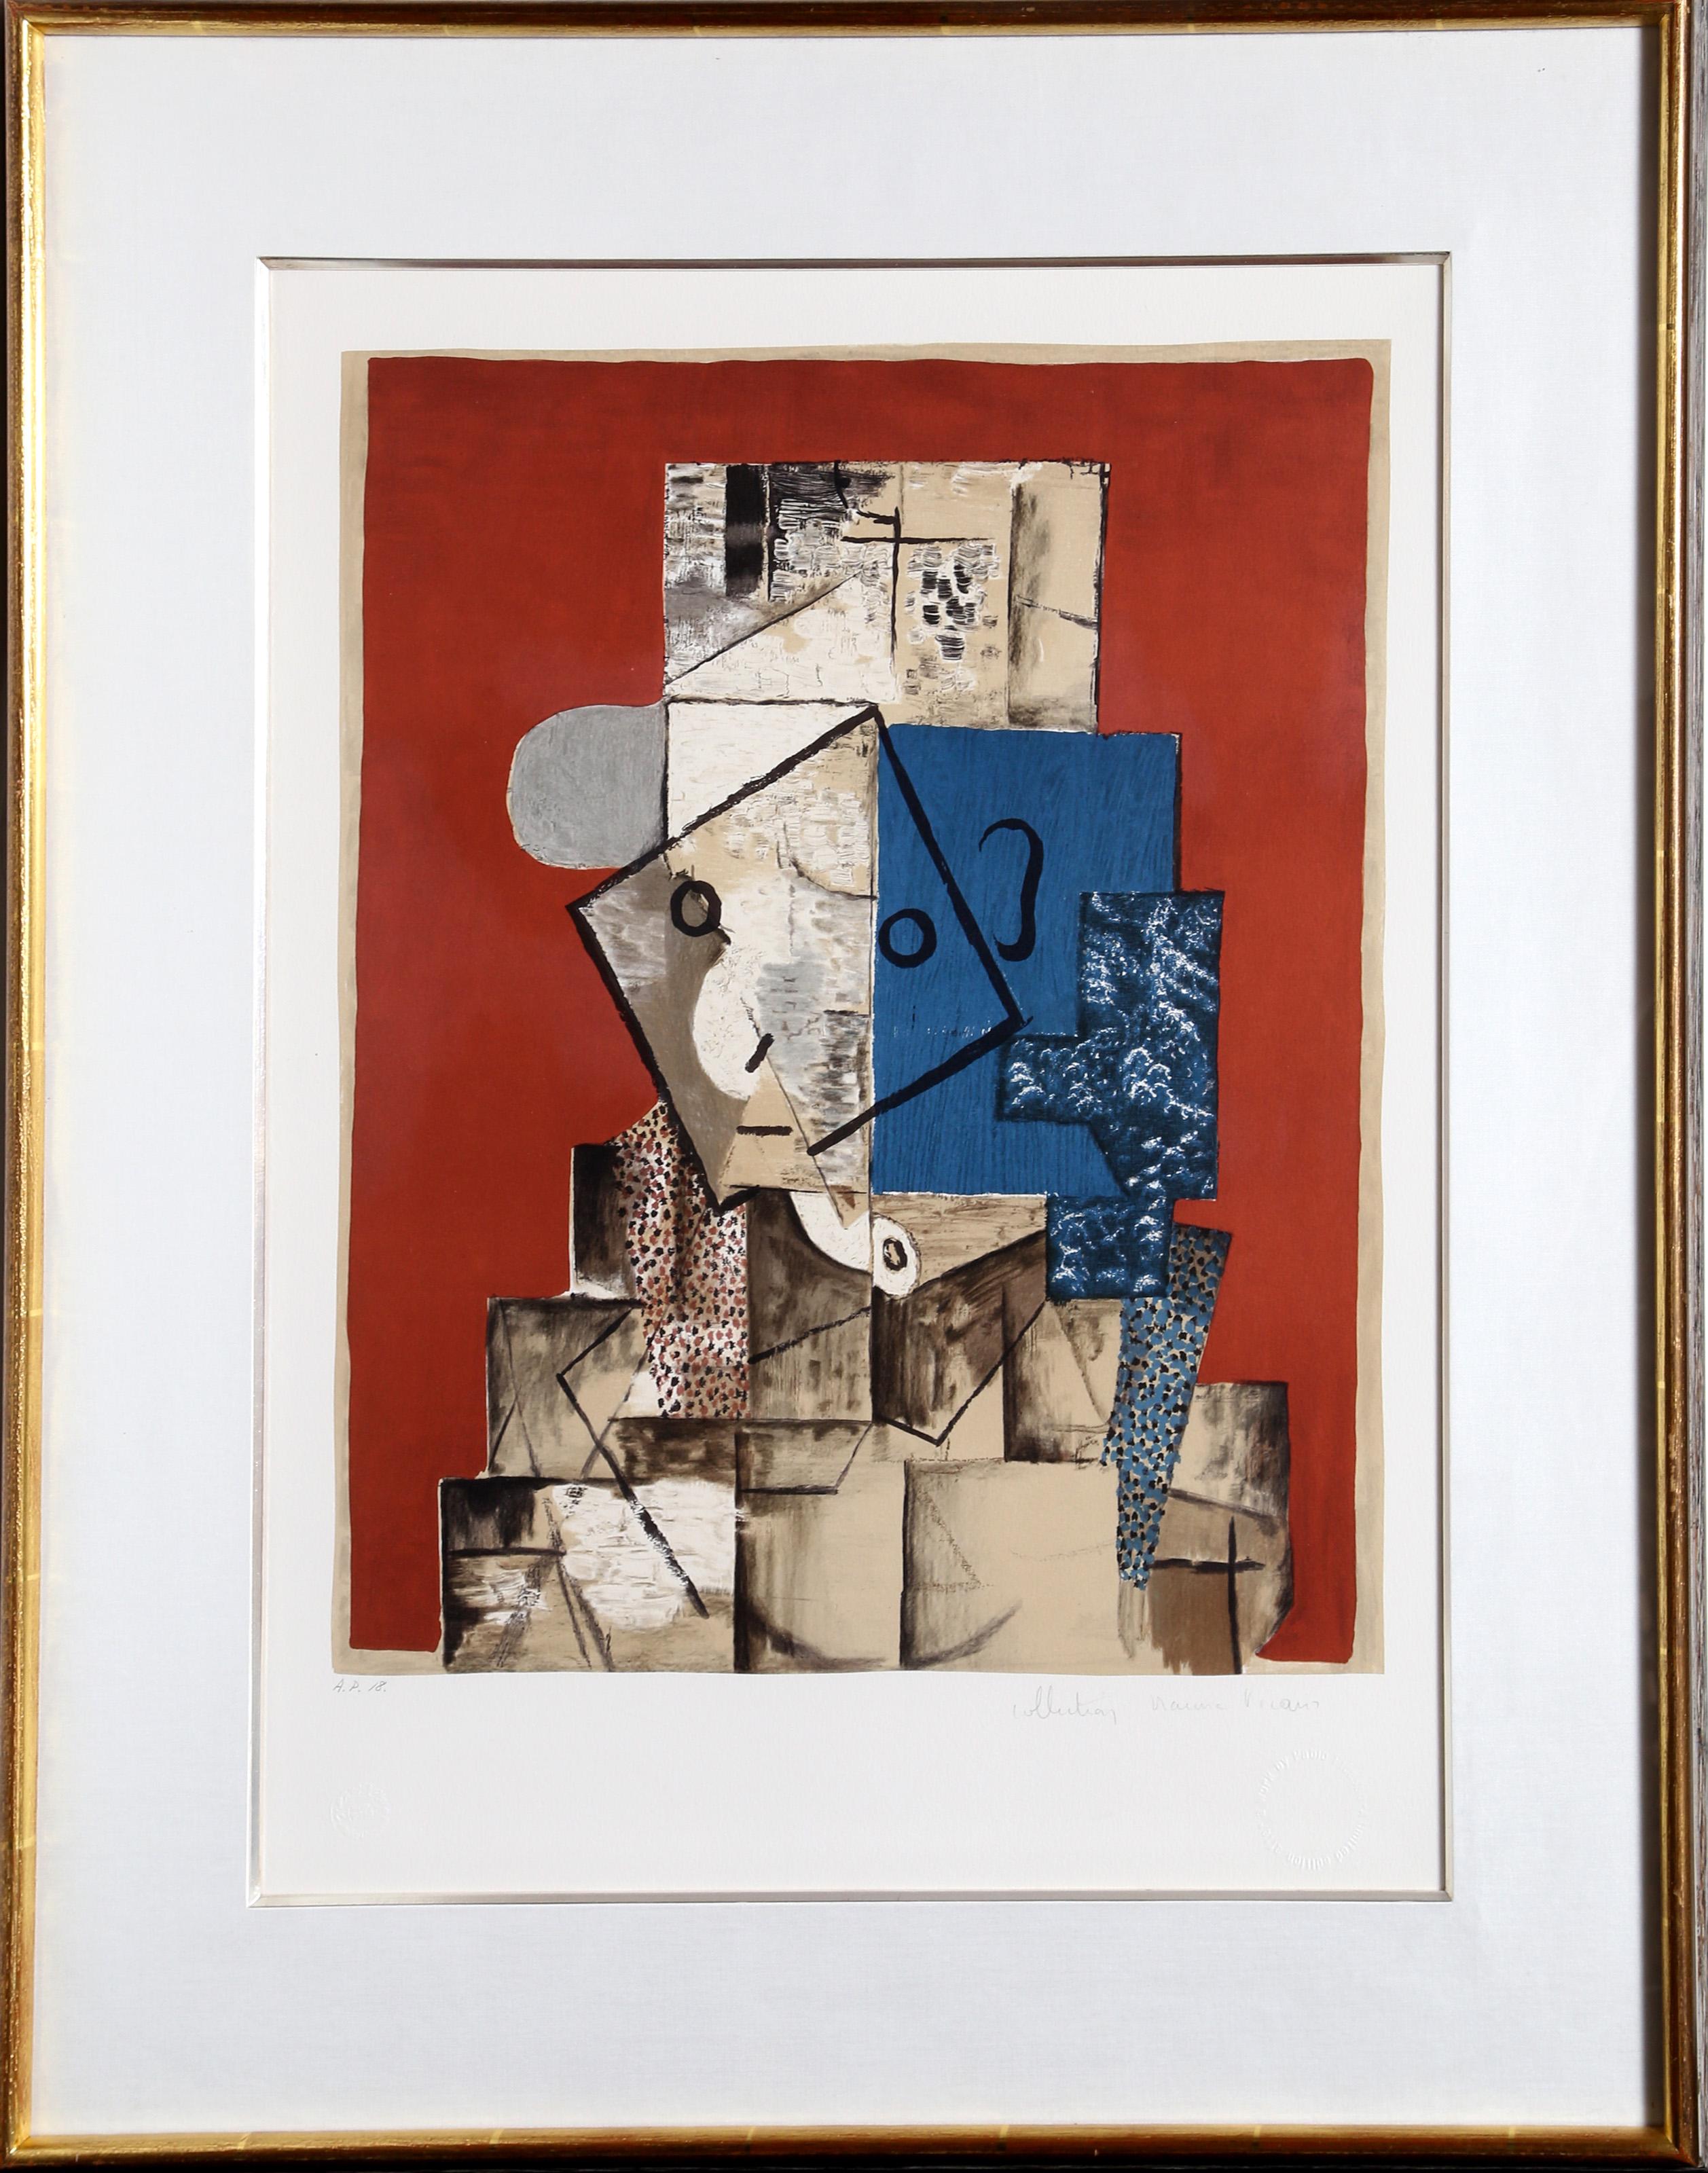 A lithograph from the Marina Picasso Estate Collection after the Pablo Picasso painting "Visage sur Fond Rouge".  The original painting was completed in 1914. In the 1970's after Picasso's death, Marina Picasso, his granddaughter, authorized the